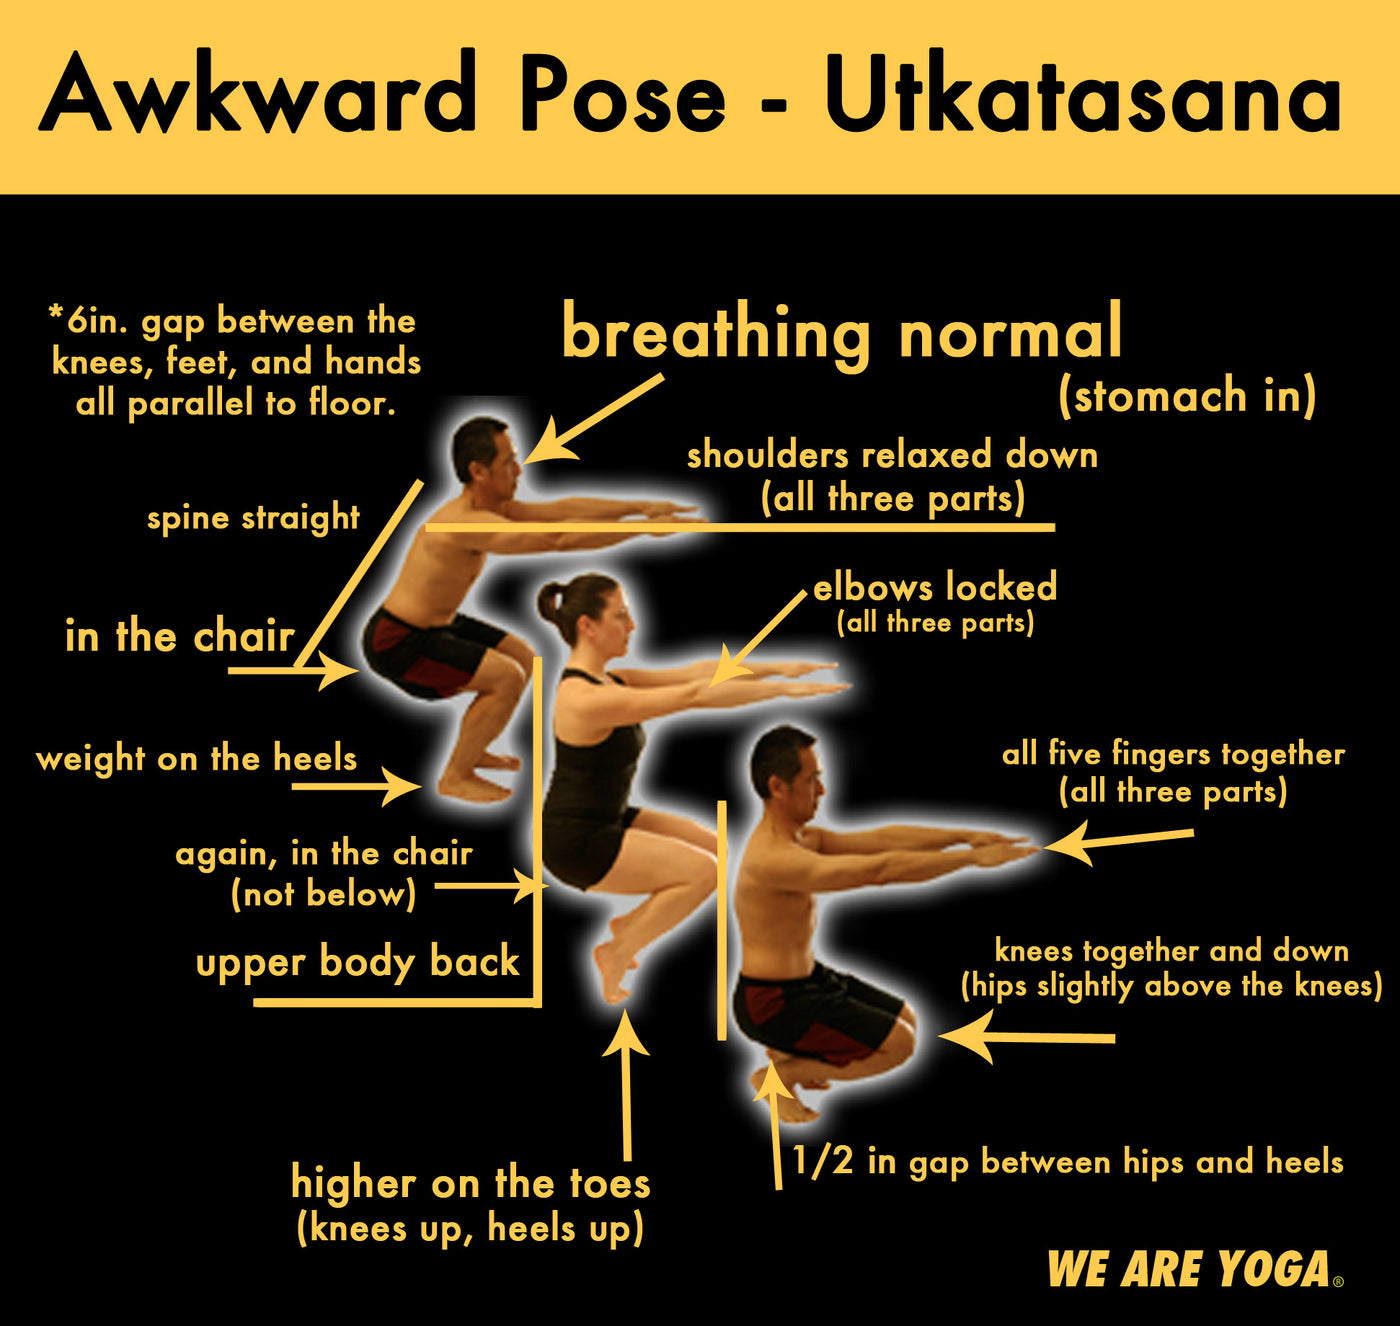 Utkatasana: How to Find Powerful Lessons In Awkward Yoga Poses